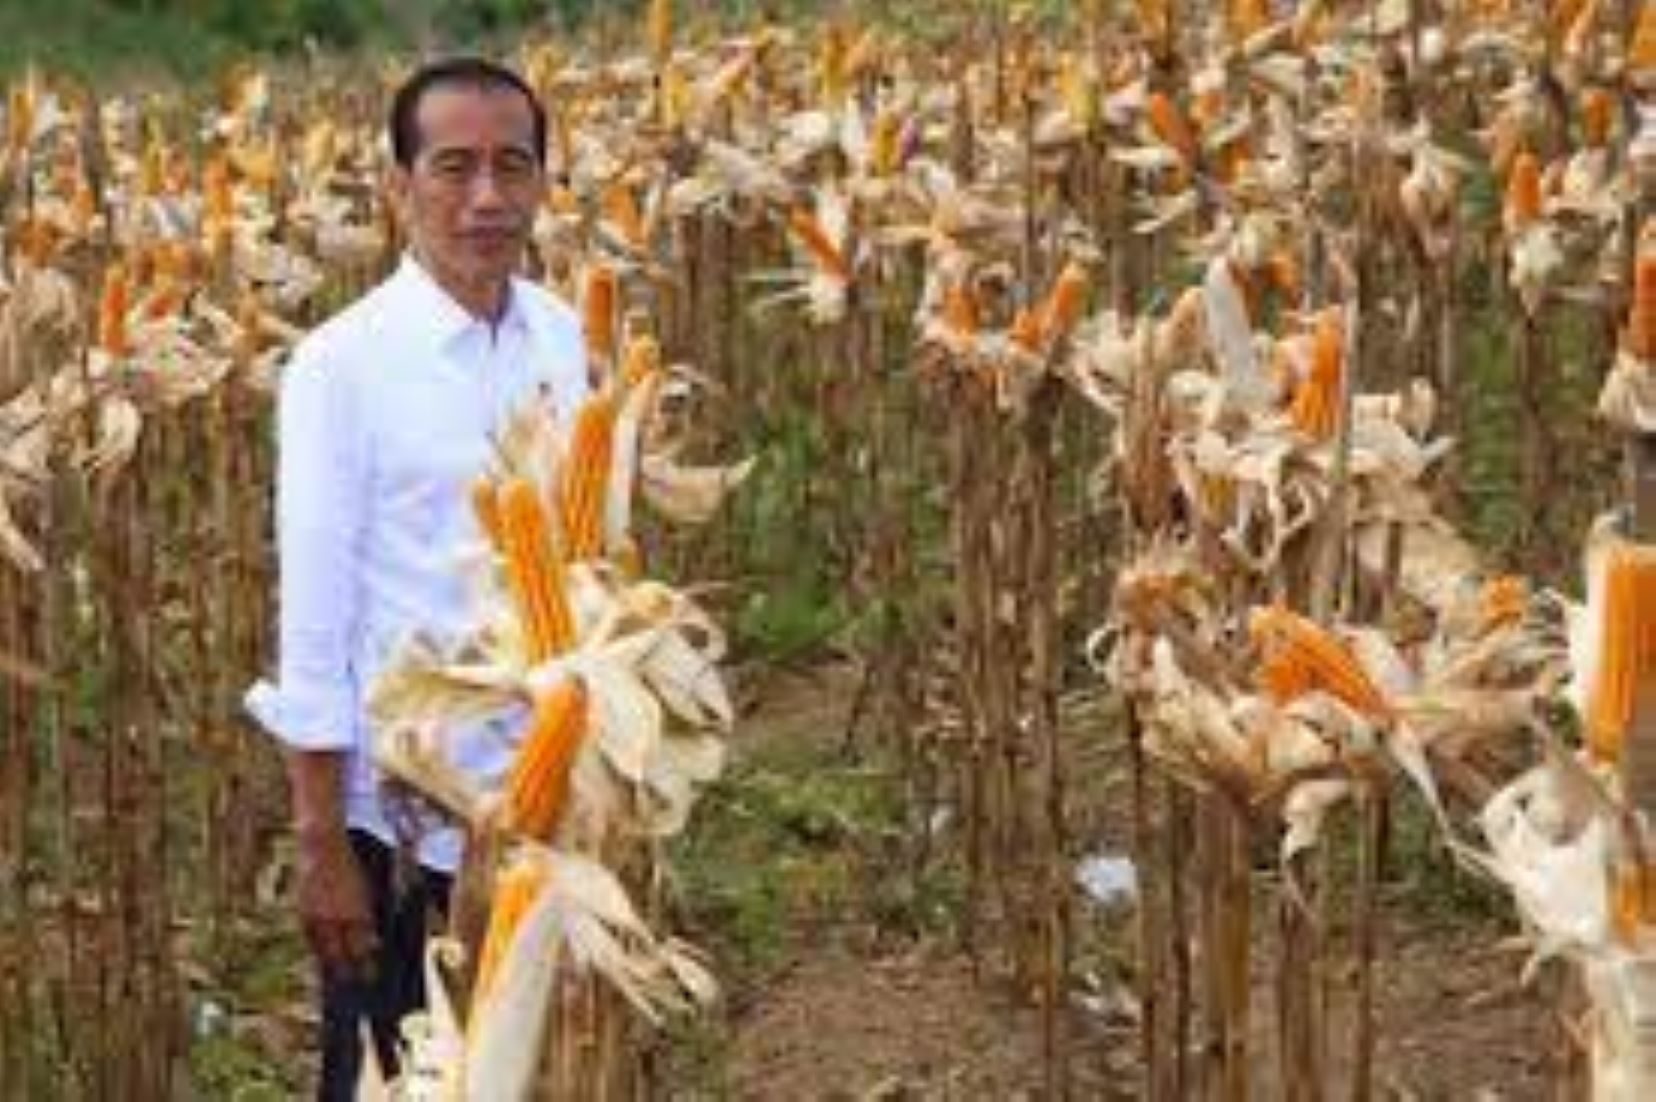 Up To 870,000 Hectares Of Land Face Drought In Indonesia Due To El Nino